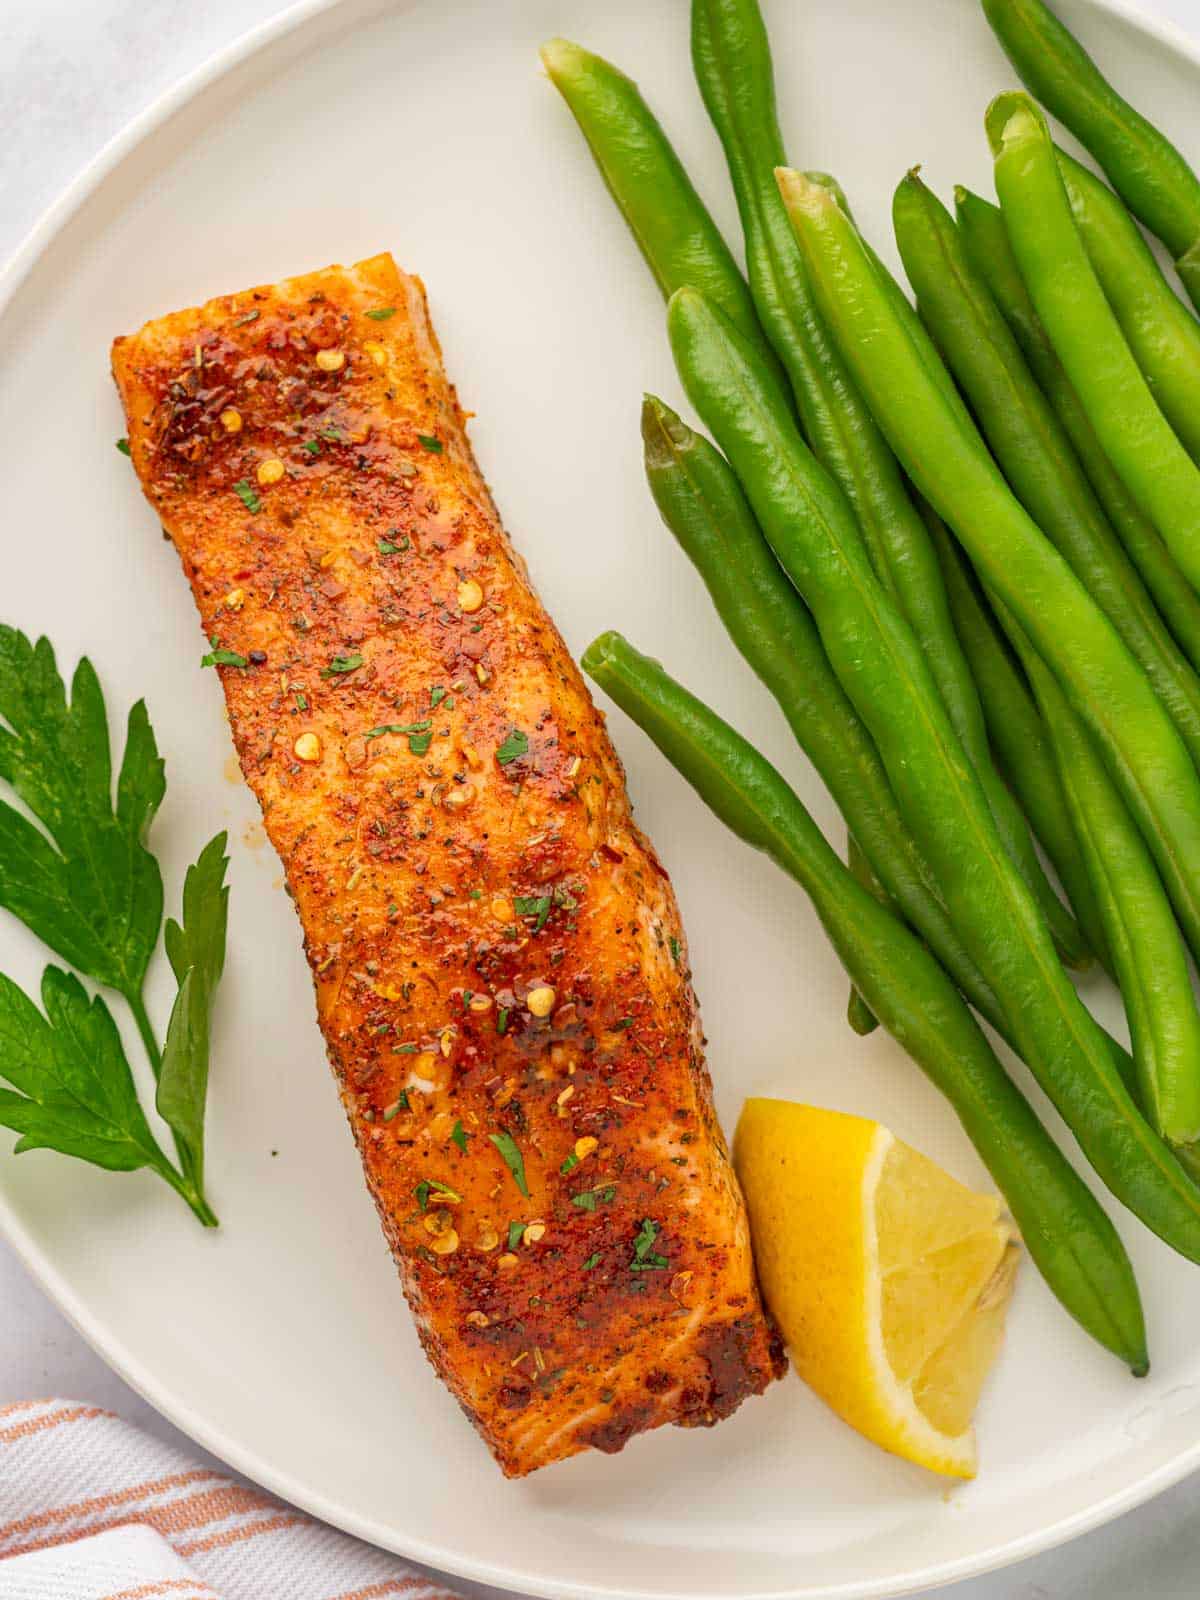 Salmon with brown sugar served with green beans.